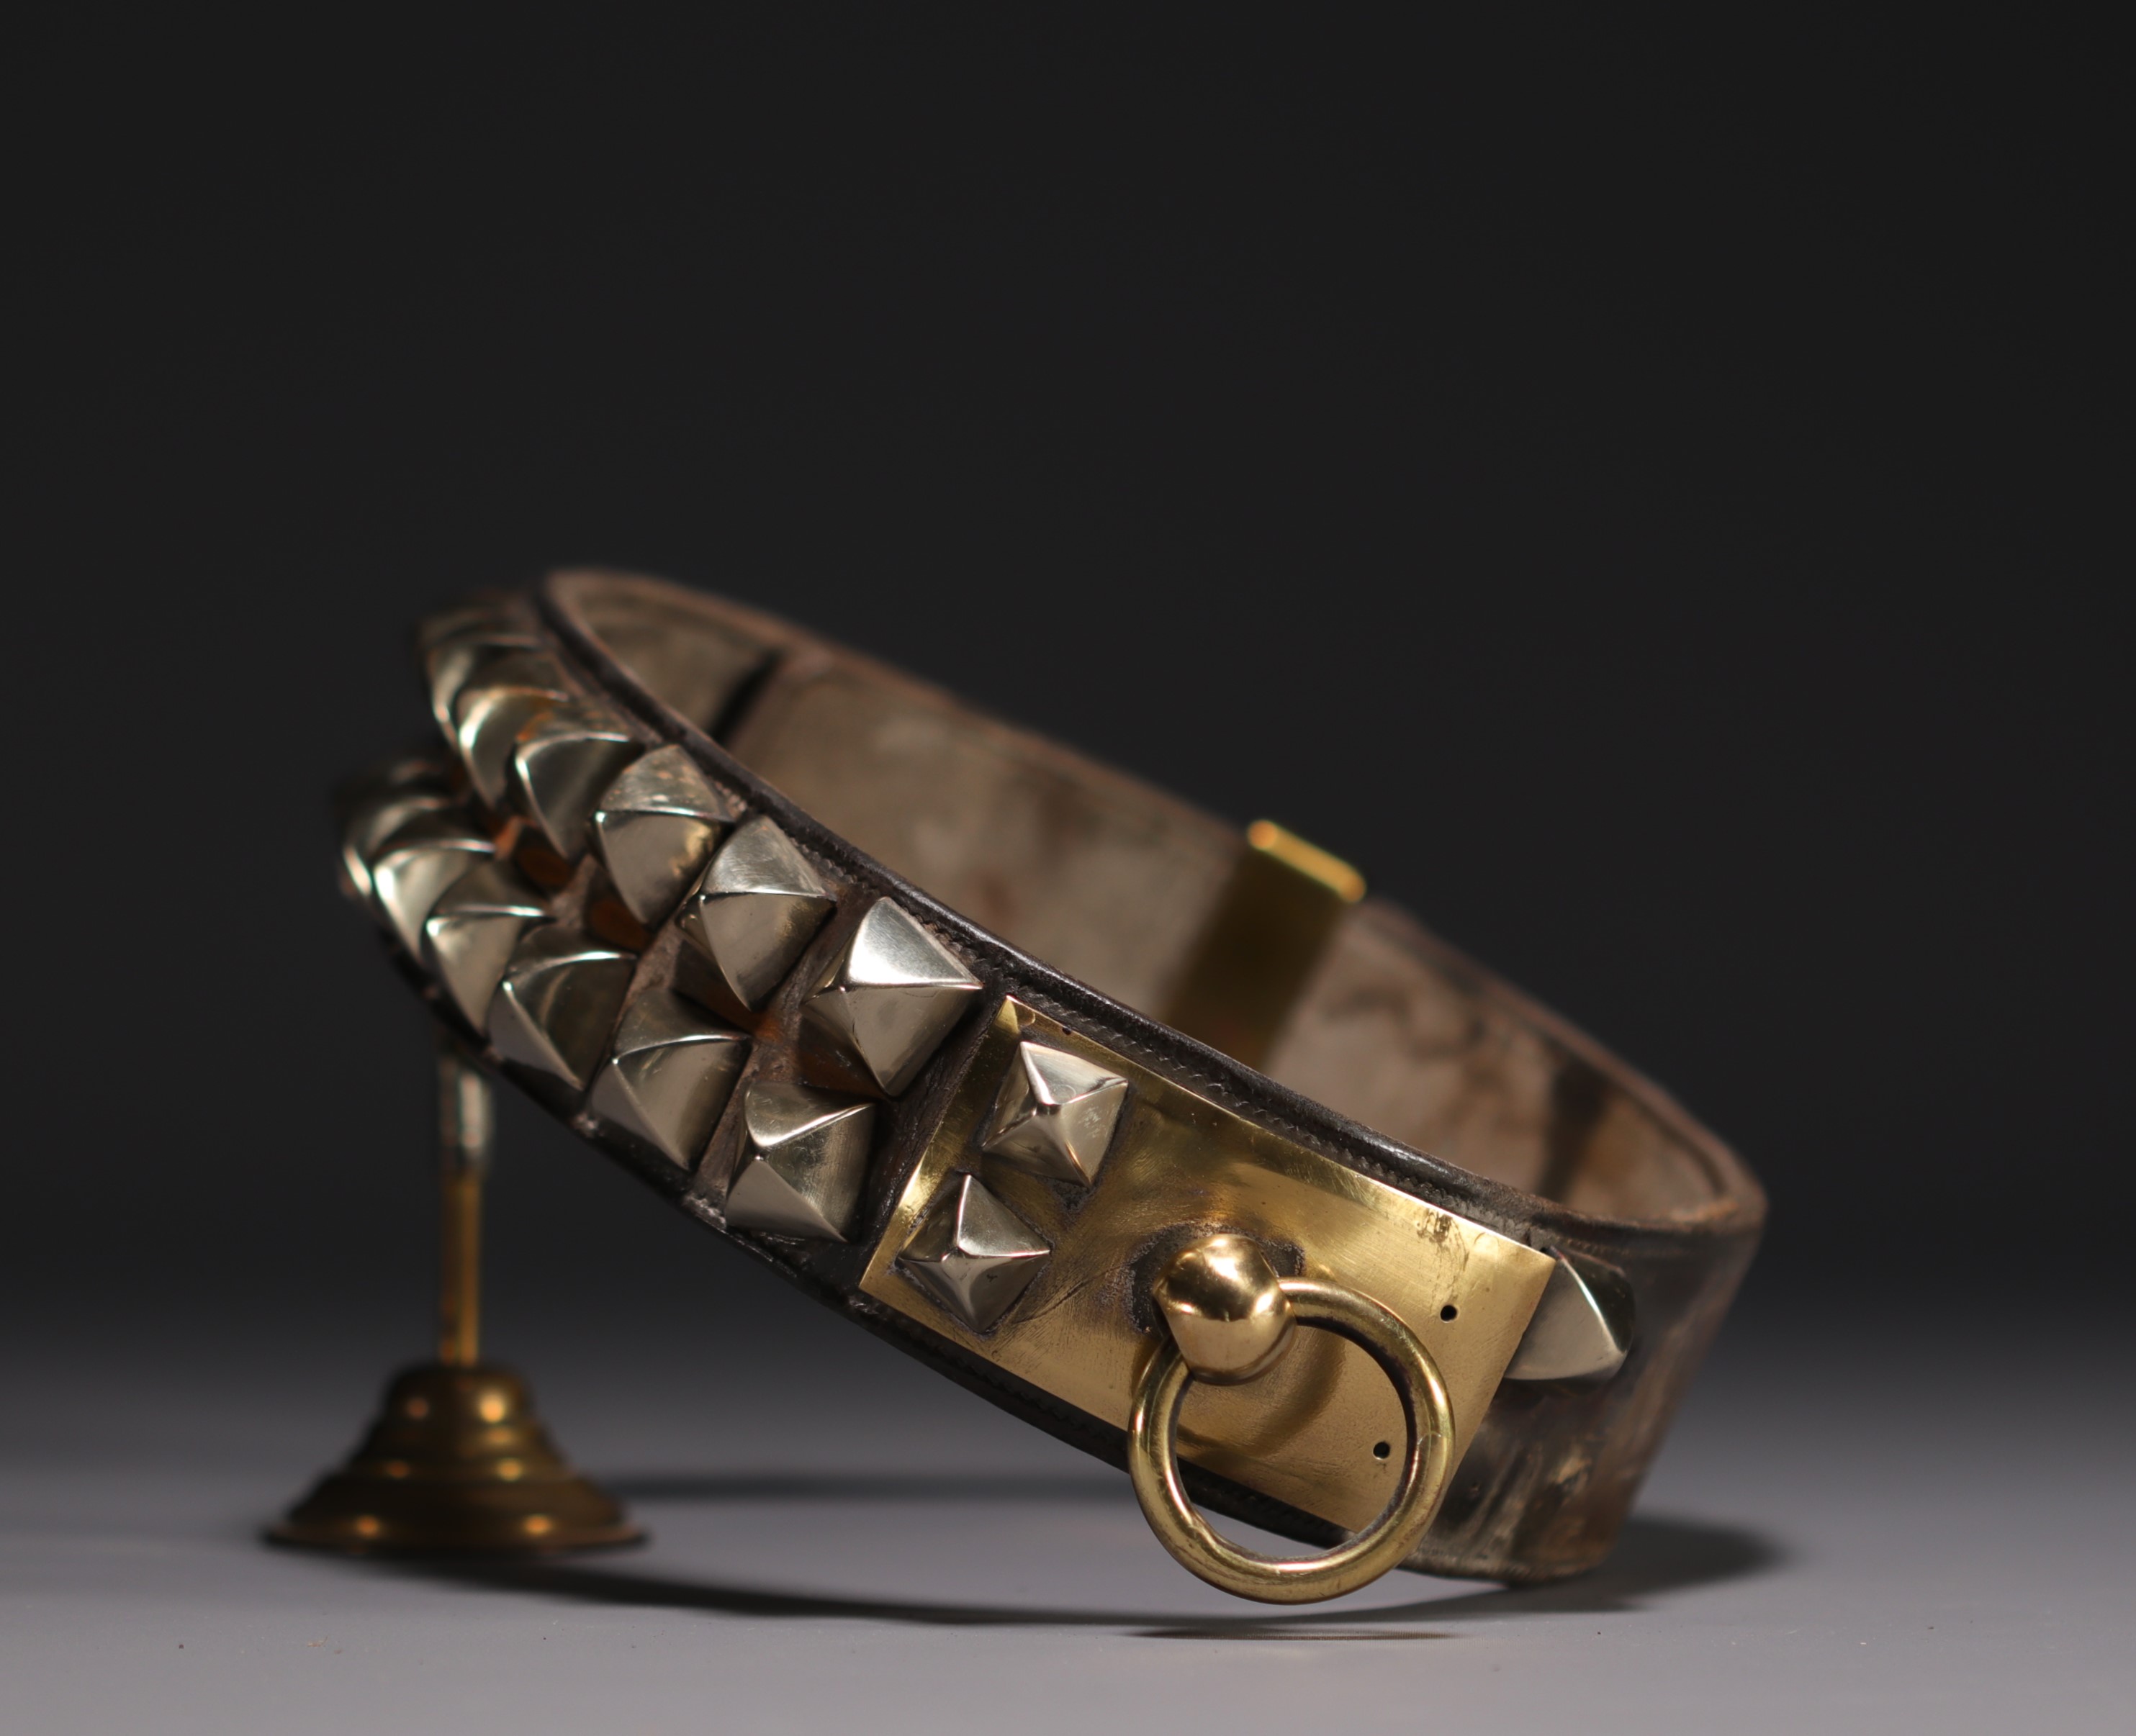 Rare leather dog collar with brass studs and padlock, 19th century. - Image 2 of 3